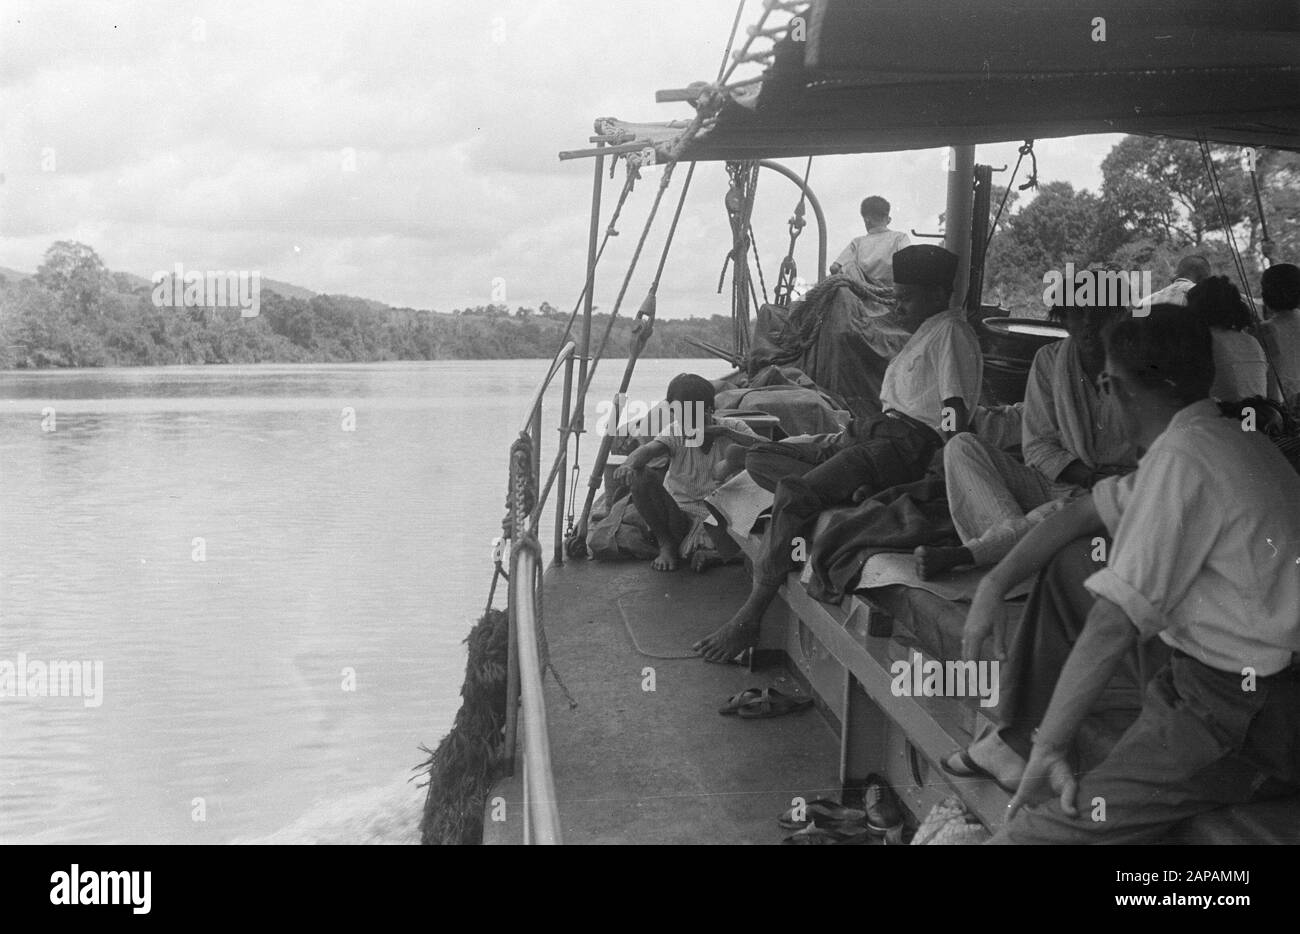 Inland ship on river Date: 1947/01/01 Location: Indonesia, Dutch East Indies Stock Photo